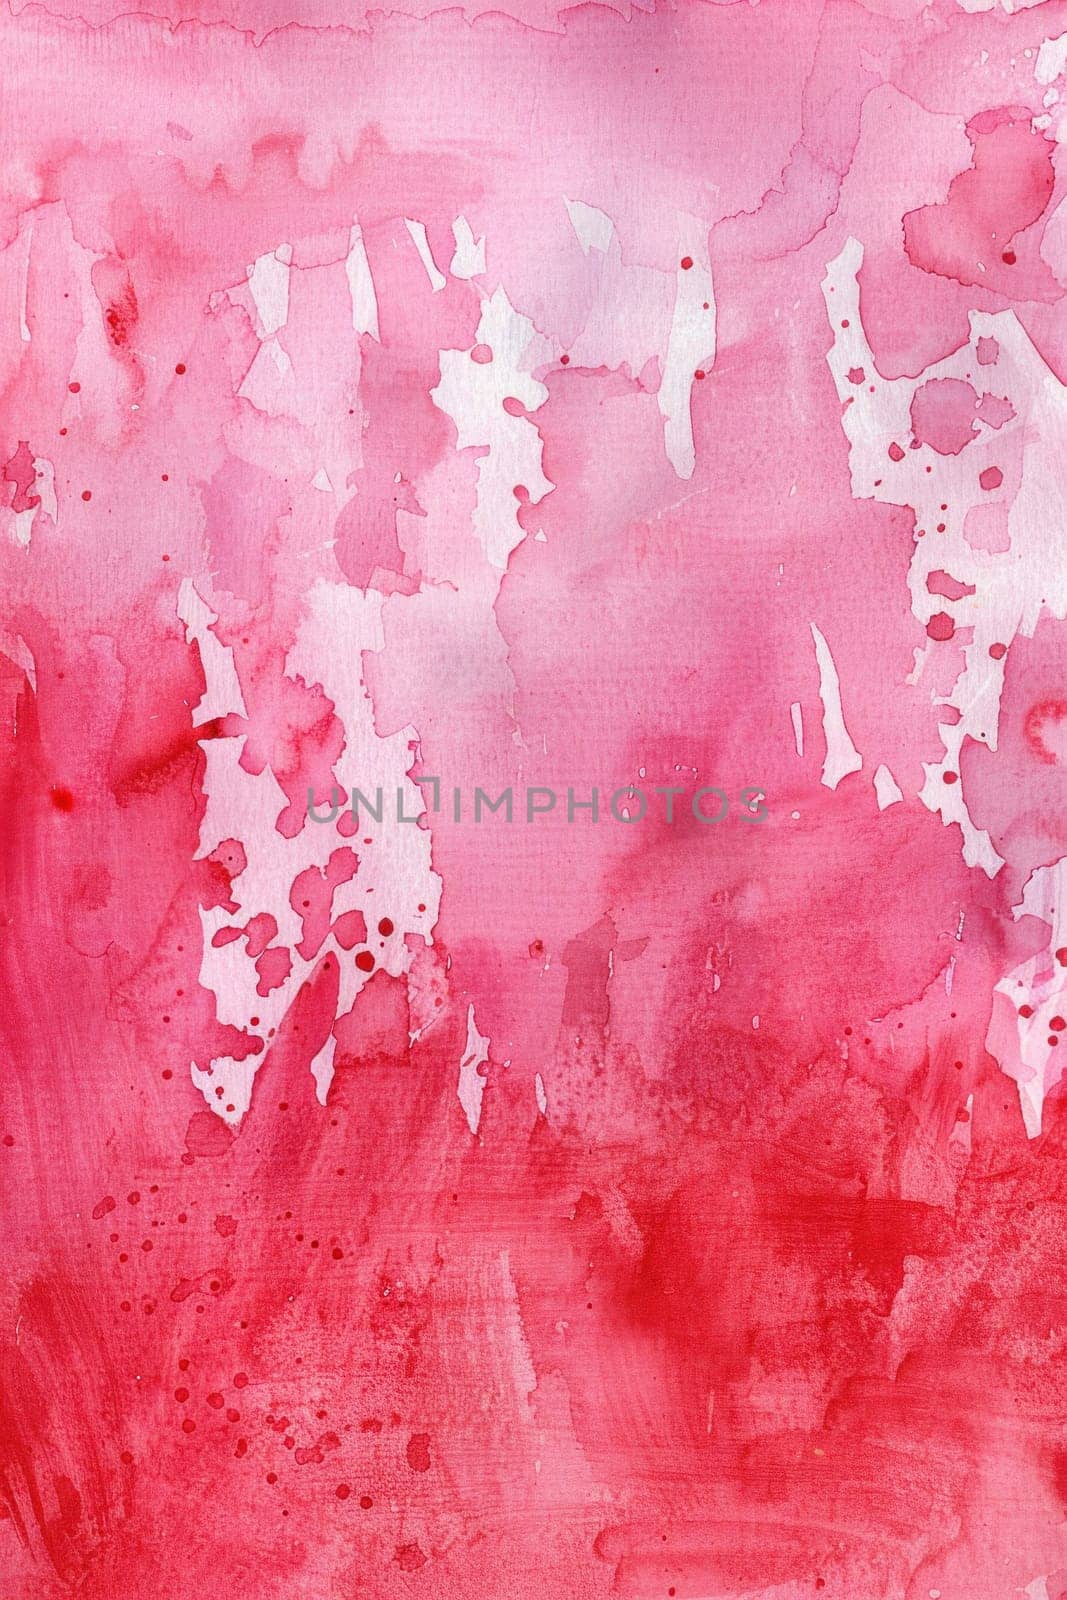 Abstract watercolor painting of red and white splashes on pink background for art and fashion design